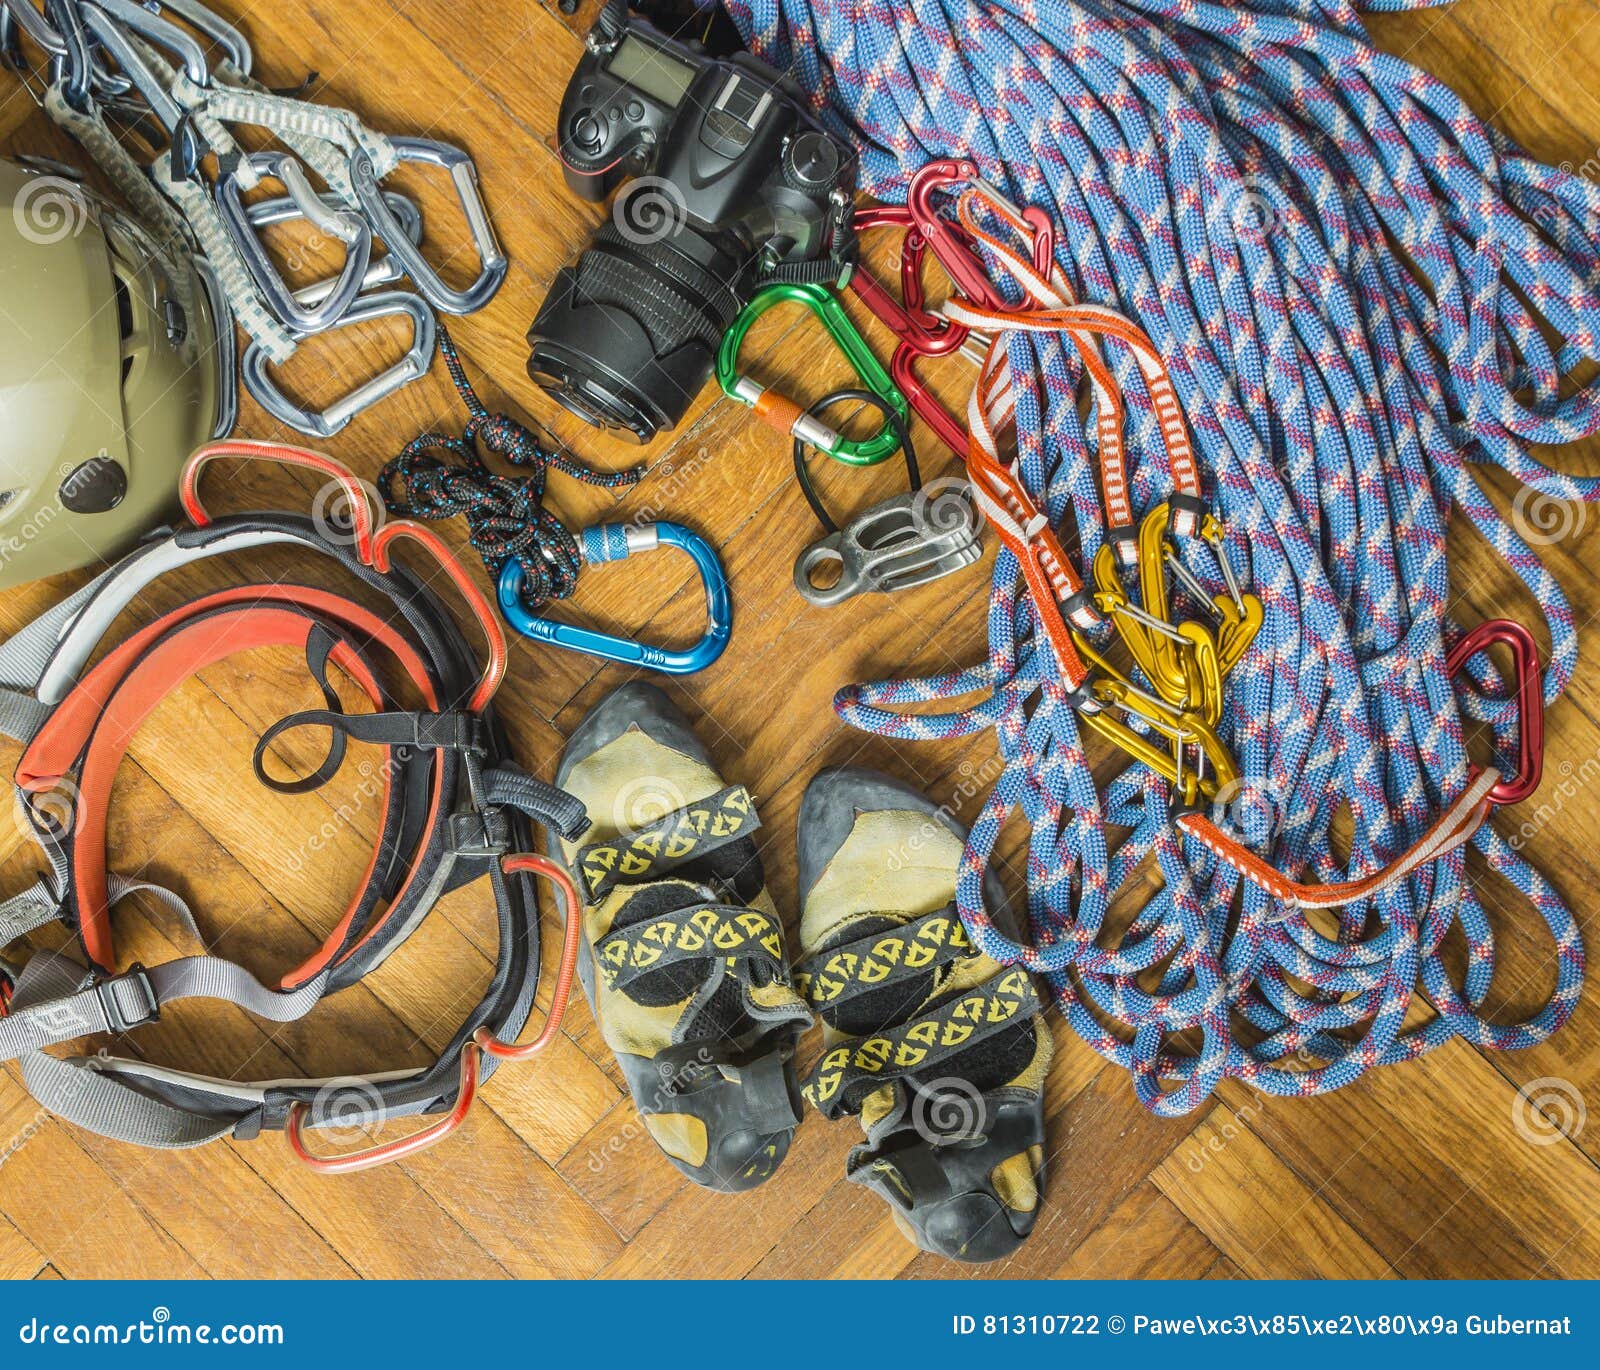 Equipment for Rock Climbing. Stock Photo - Image of life, abseil: 81310722